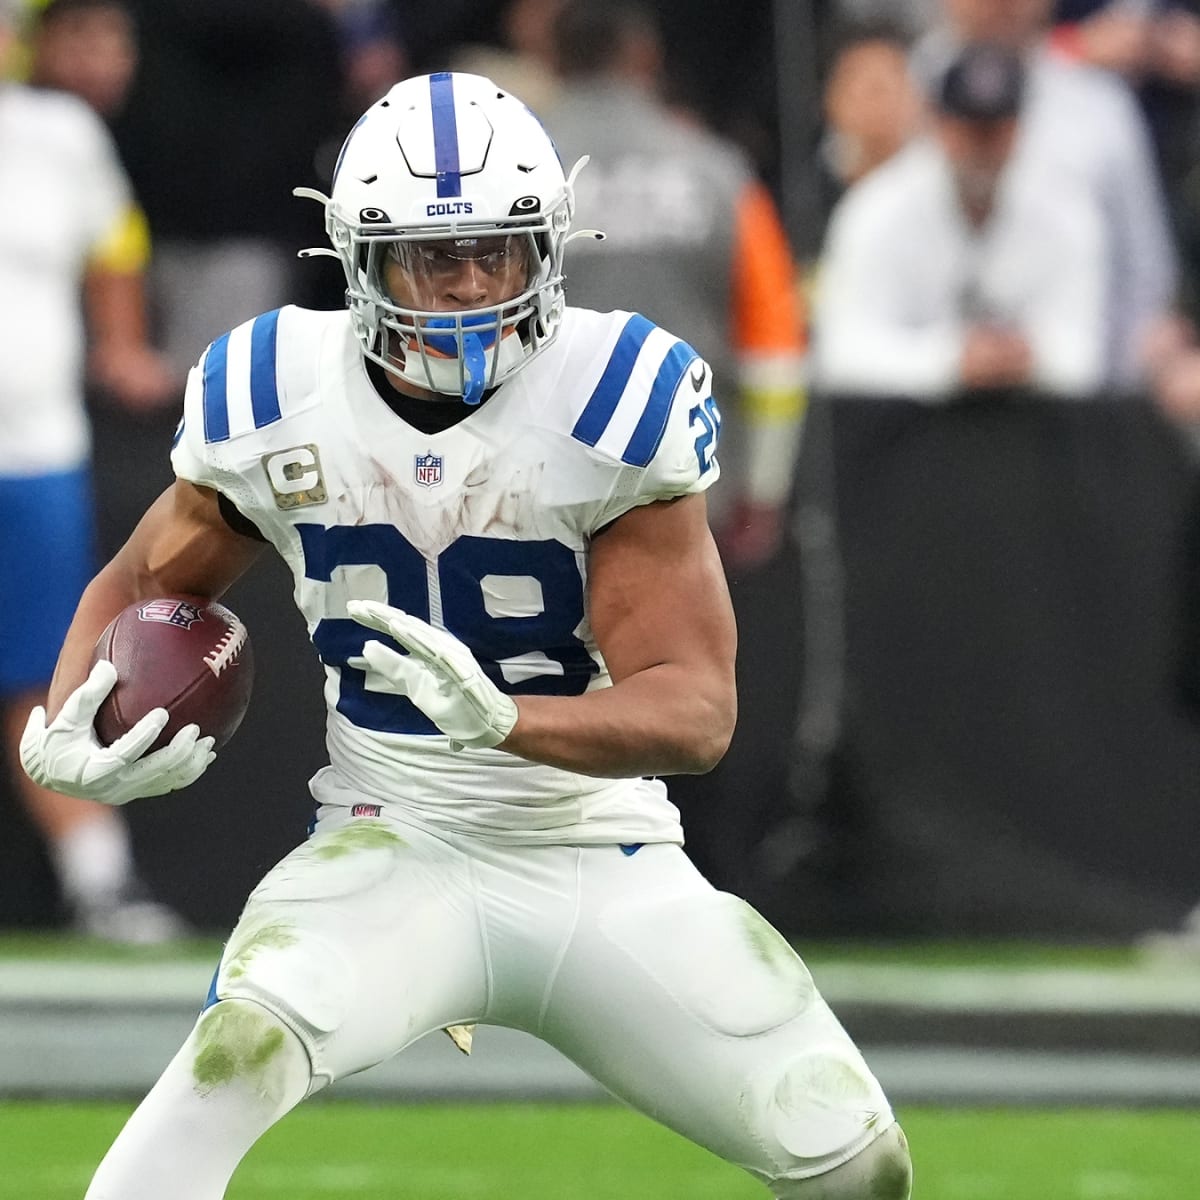 Inactive RB Jonathan Taylor's value evident in Colts' Week 1 loss to  Jaguars